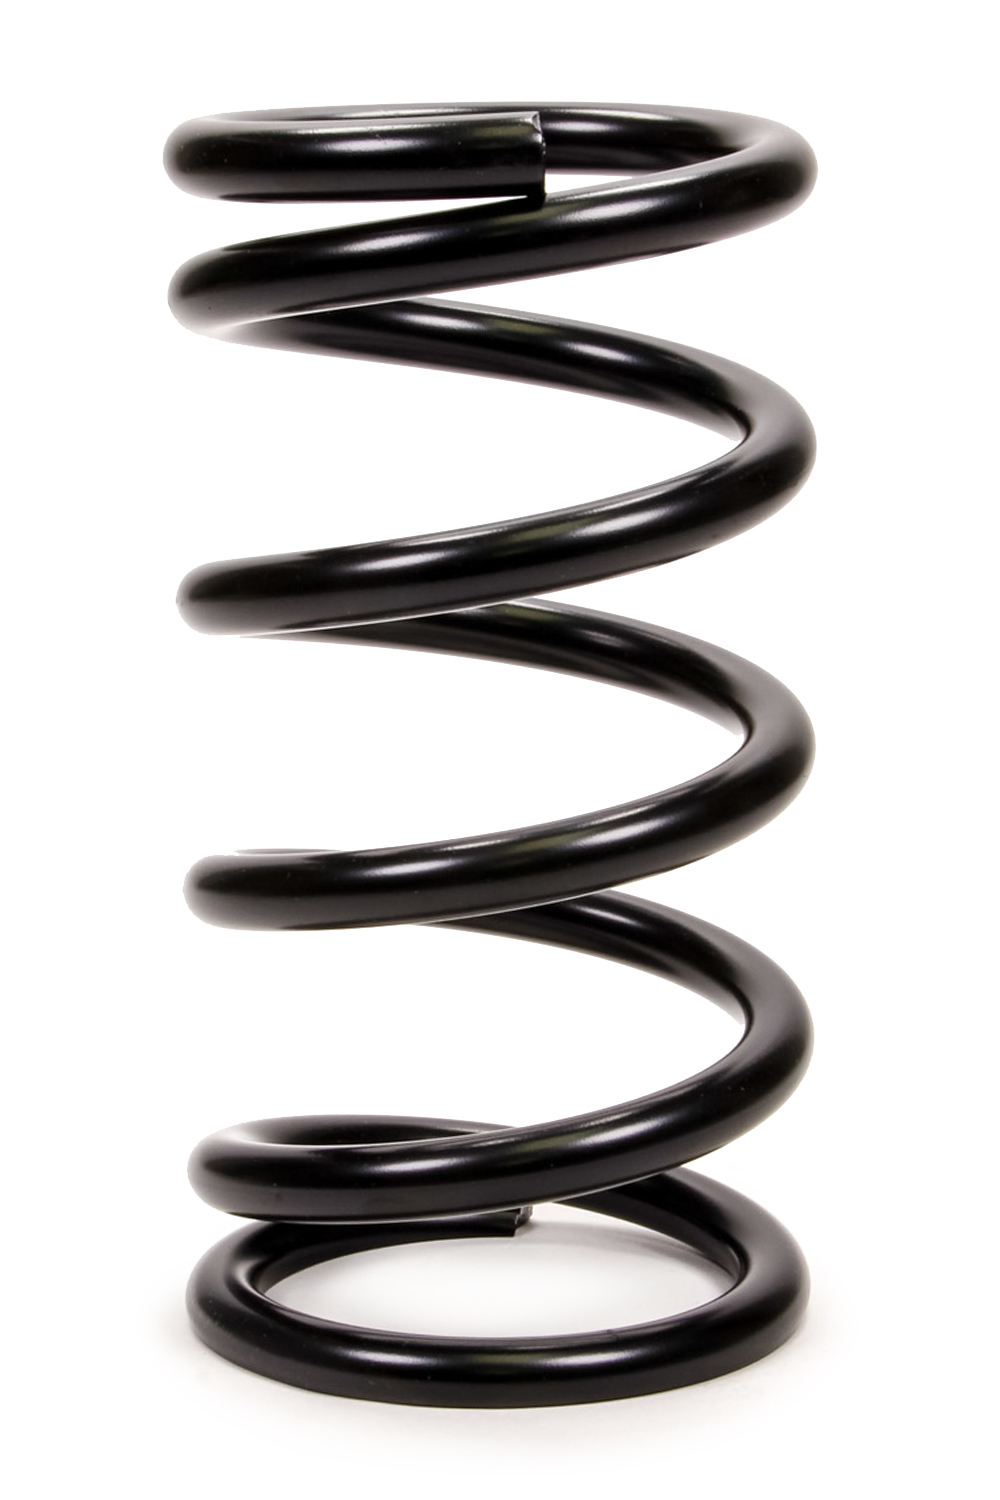 Swift Springs 950-550-500 Coil Spring, Conventional, 5.5 in OD, 9.500 in Length, 500 lb/in Spring Rate, Front, Steel, Black Powder Coat, Each